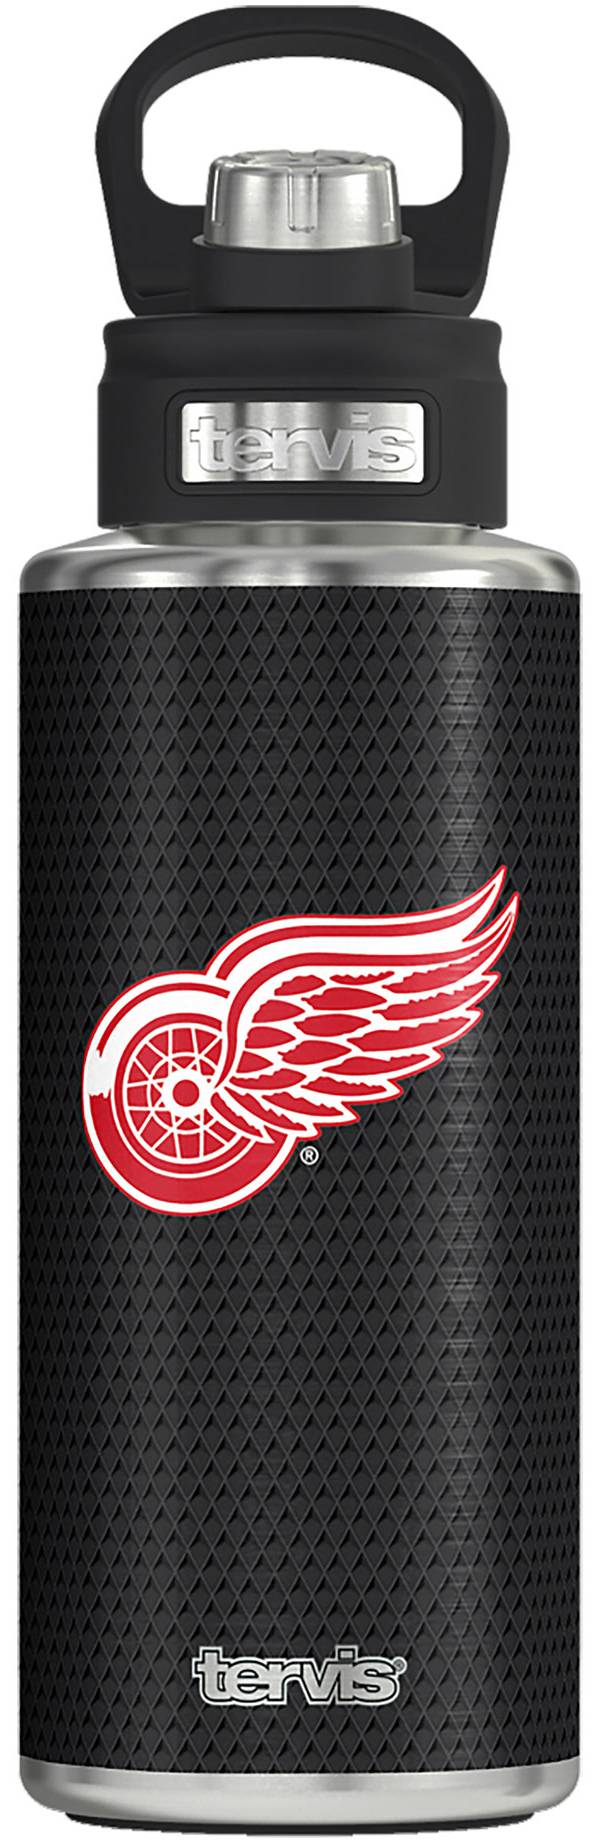 Tervis Detroit Red Wings 32oz. Water Bottle product image